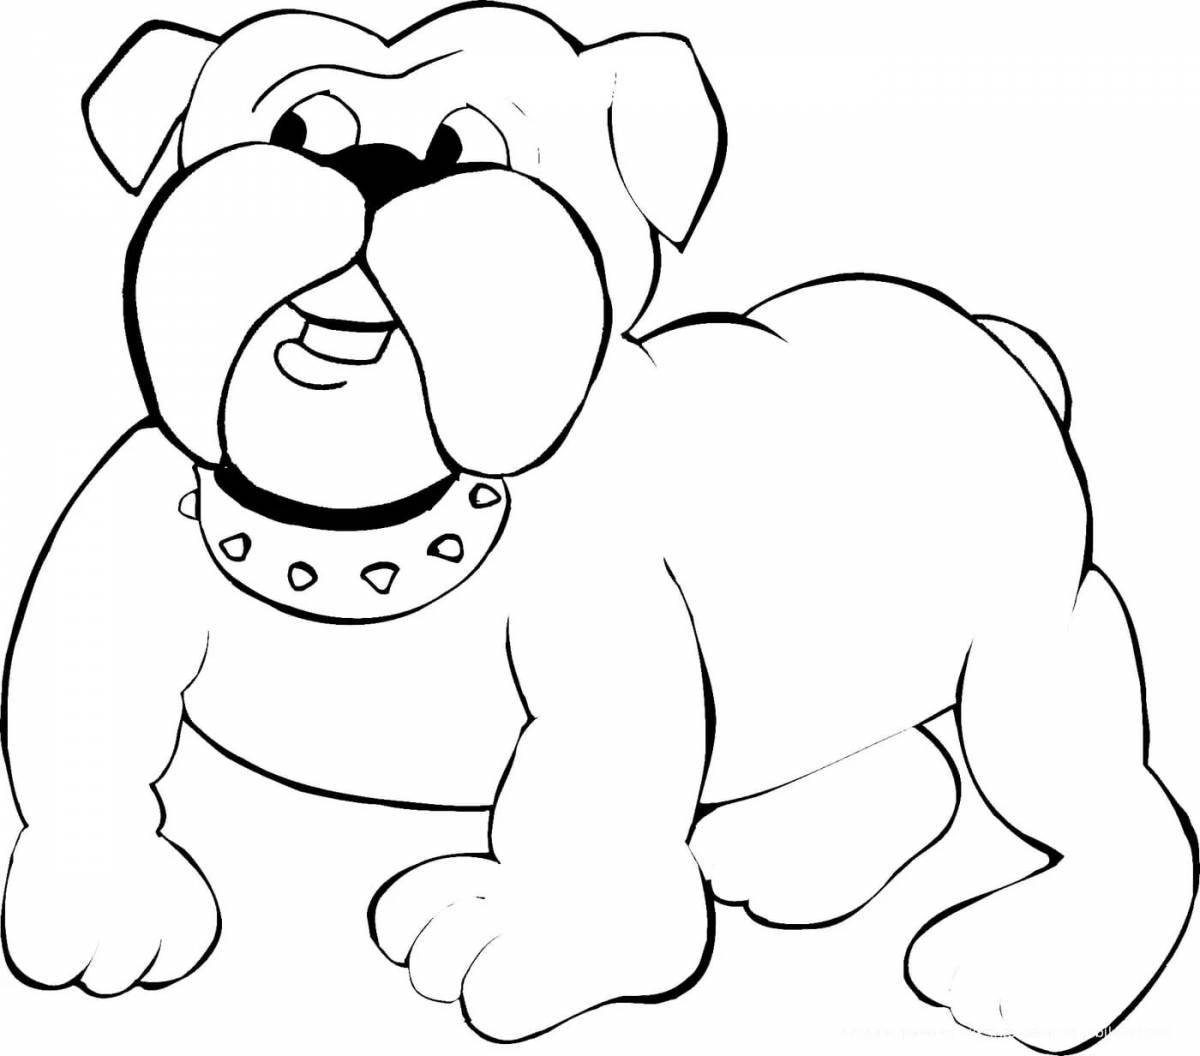 Playful bulldog coloring page for kids